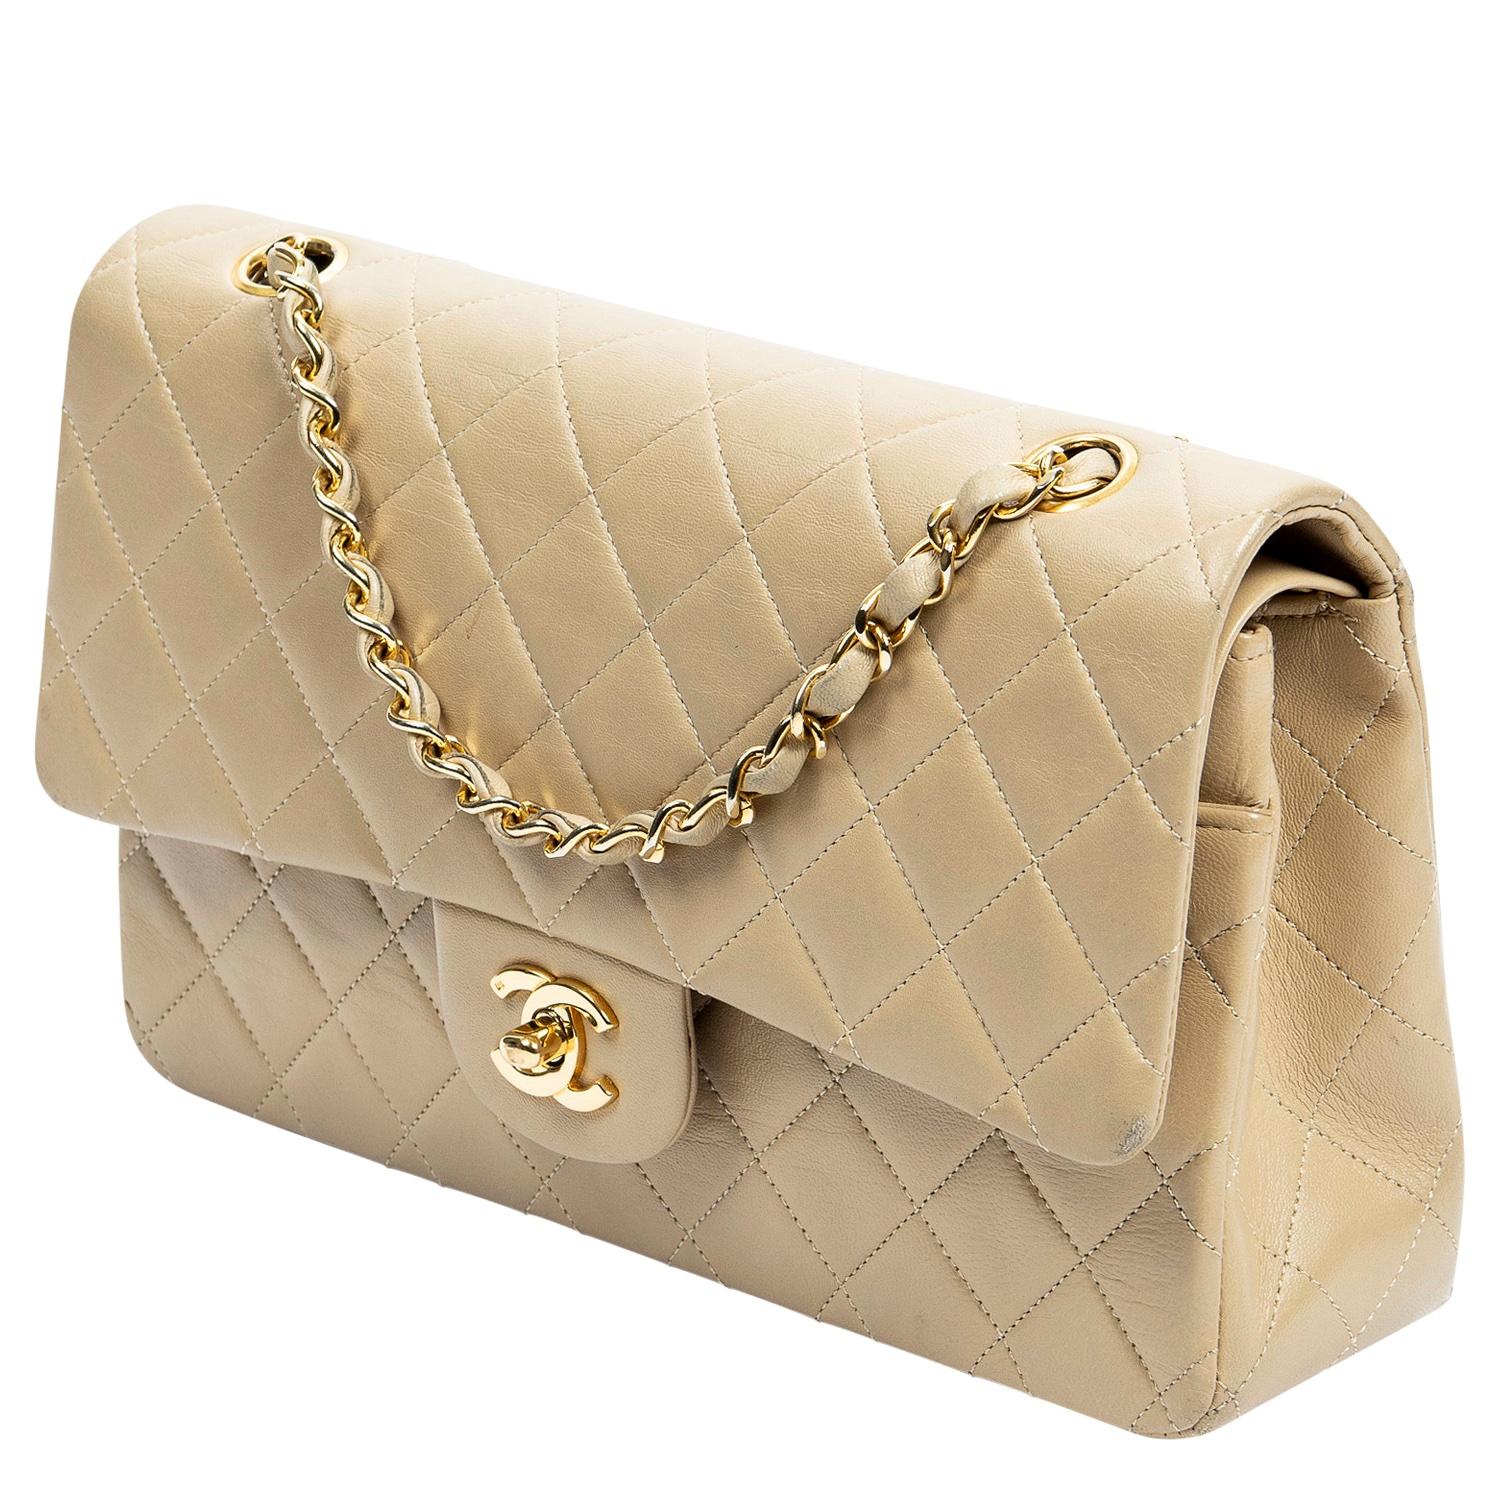 In the slightly larger size (25cm), this medium beauty is the perfect staple. If you are going to get a classic Chanel for your collection, THIS is the one to get as it’s the original double flap bag. This creme quilted leather vintage Chanel